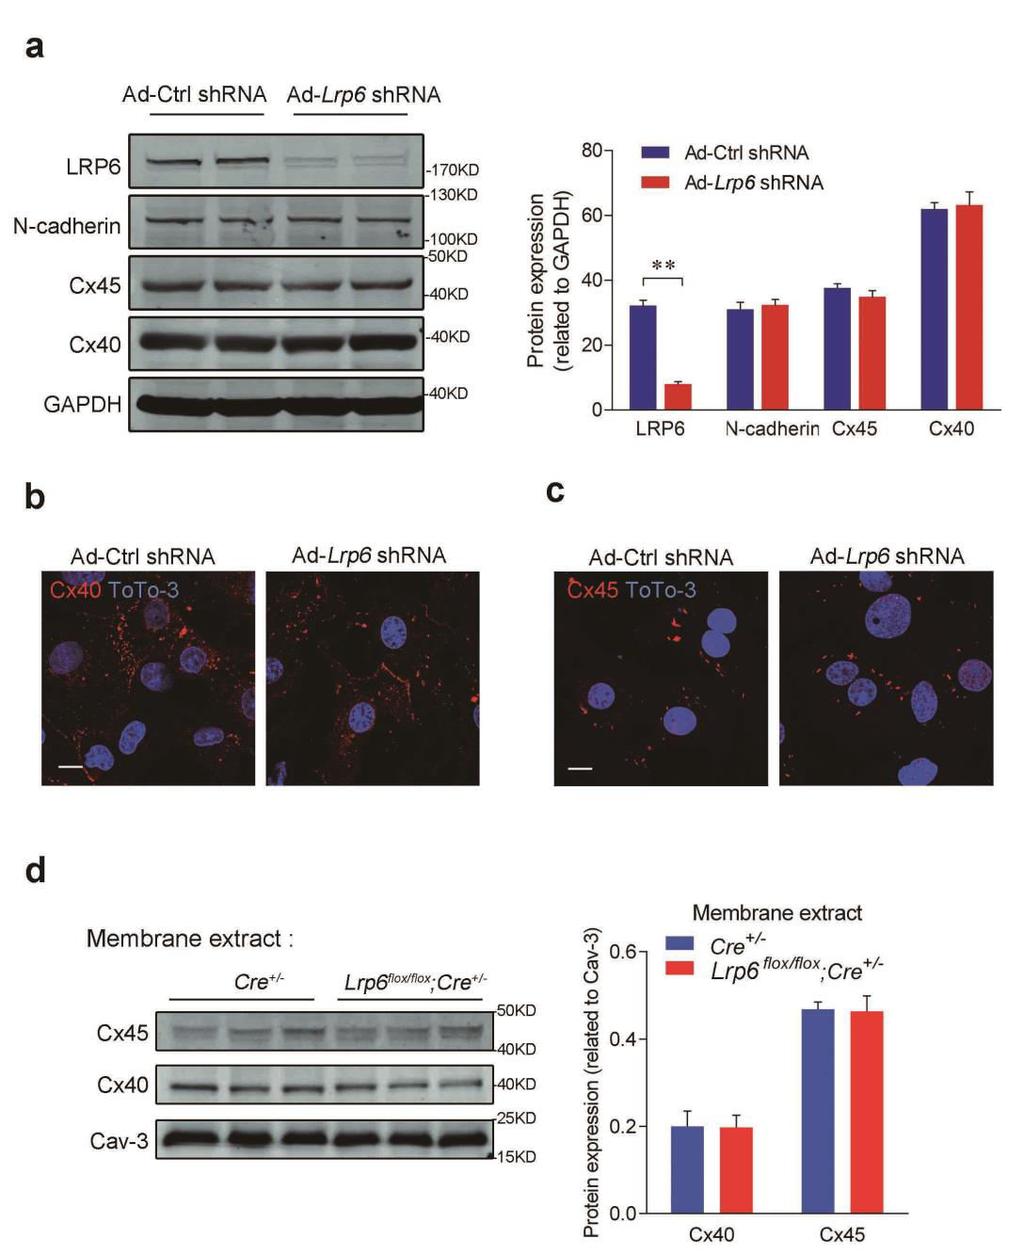 Supplementary Figure 2. Effects of LRP6 on Cx40, 45 and N-cadherin in cardiomyocytes. (a) Western blotting examination of Cx40, 45 and N-cadherin protein expression.